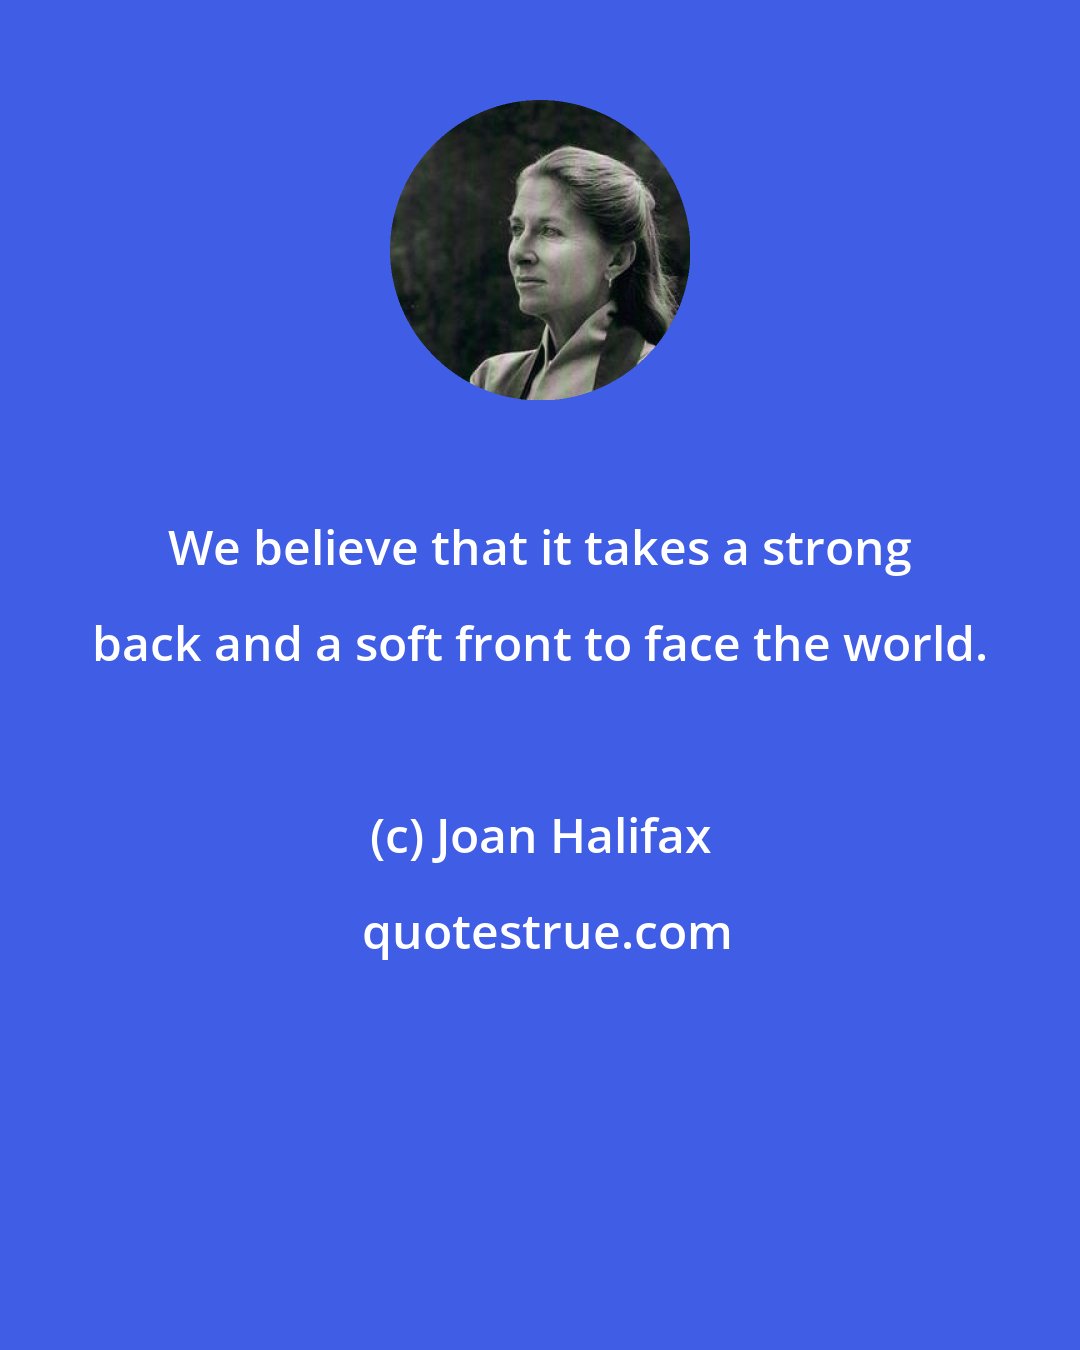 Joan Halifax: We believe that it takes a strong back and a soft front to face the world.